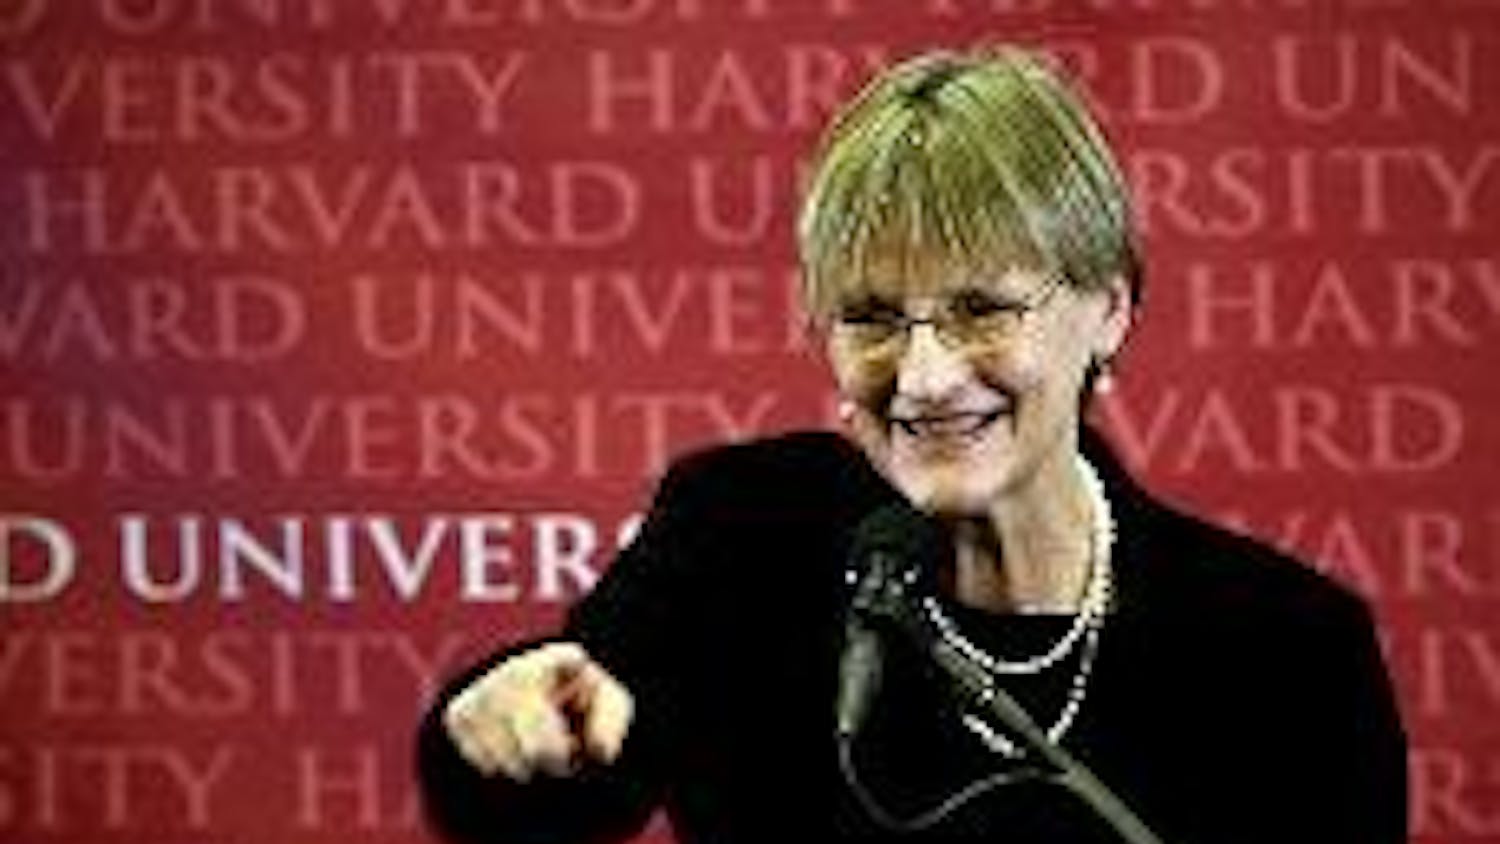 Harvard recently elected Drew Gilpin Faust as its first female president.